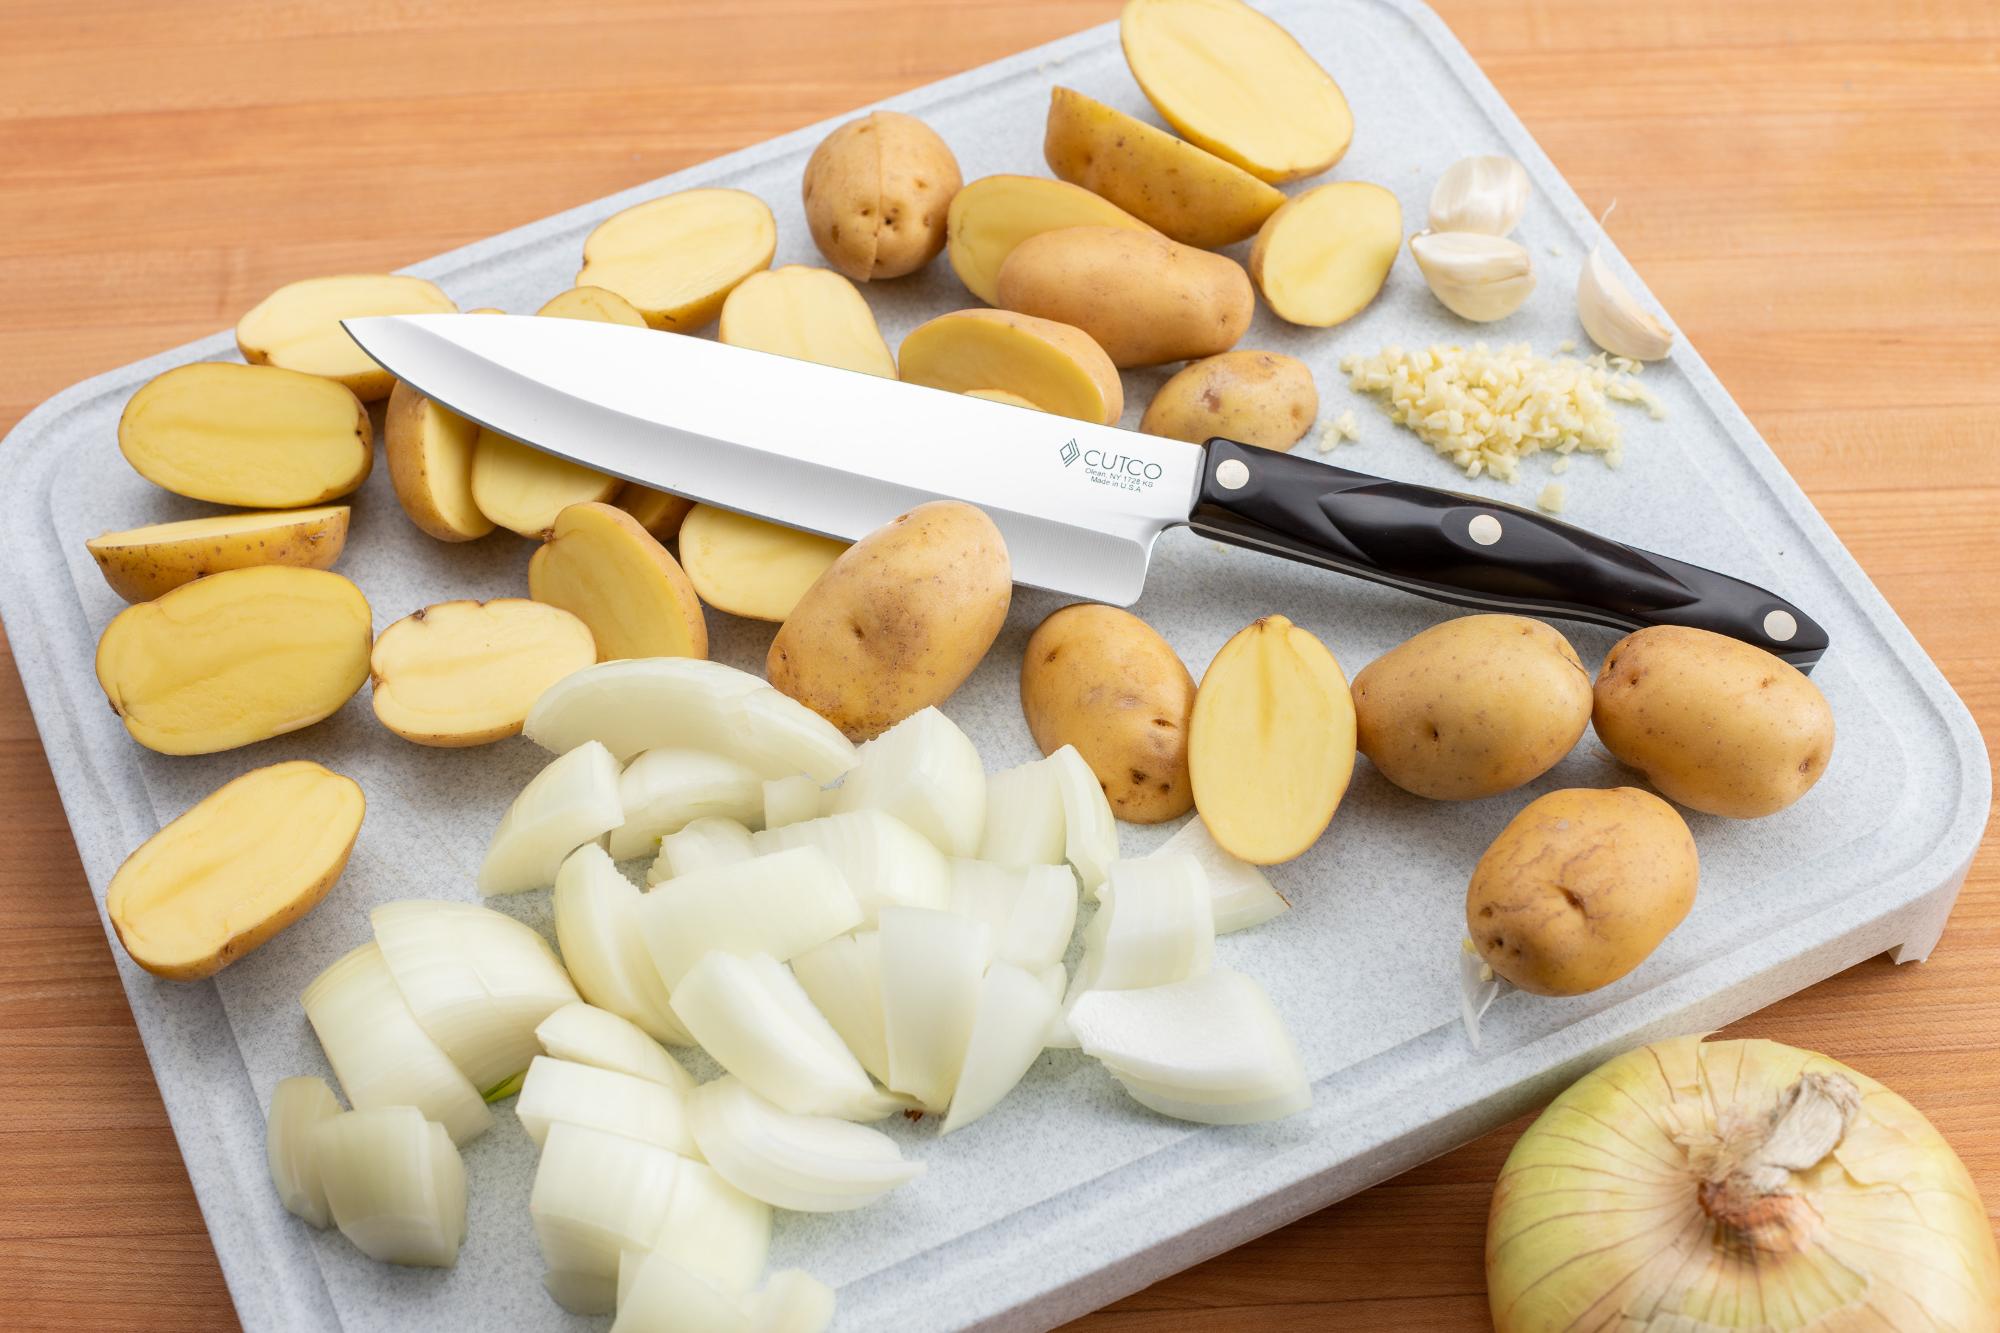 Cut up potatoes with a Petite Chef.